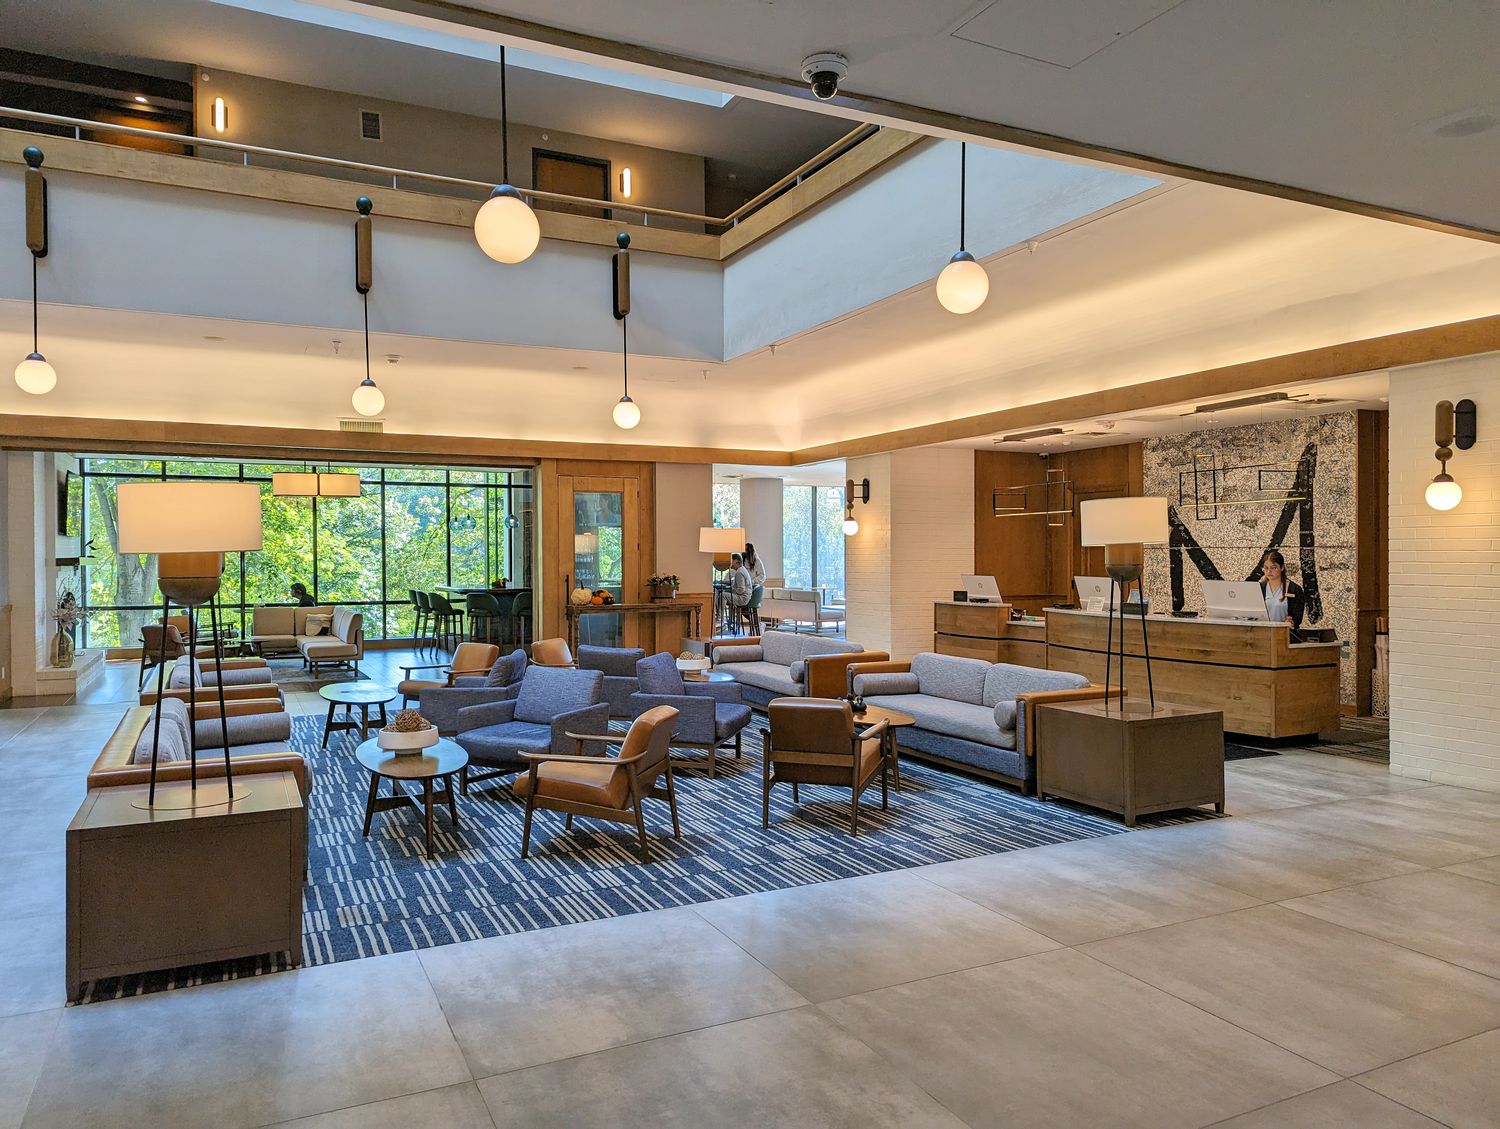 The open lobby at Merriweather Lakehouse Hotel includes a check in desk with plenty of couch and chair seating. 